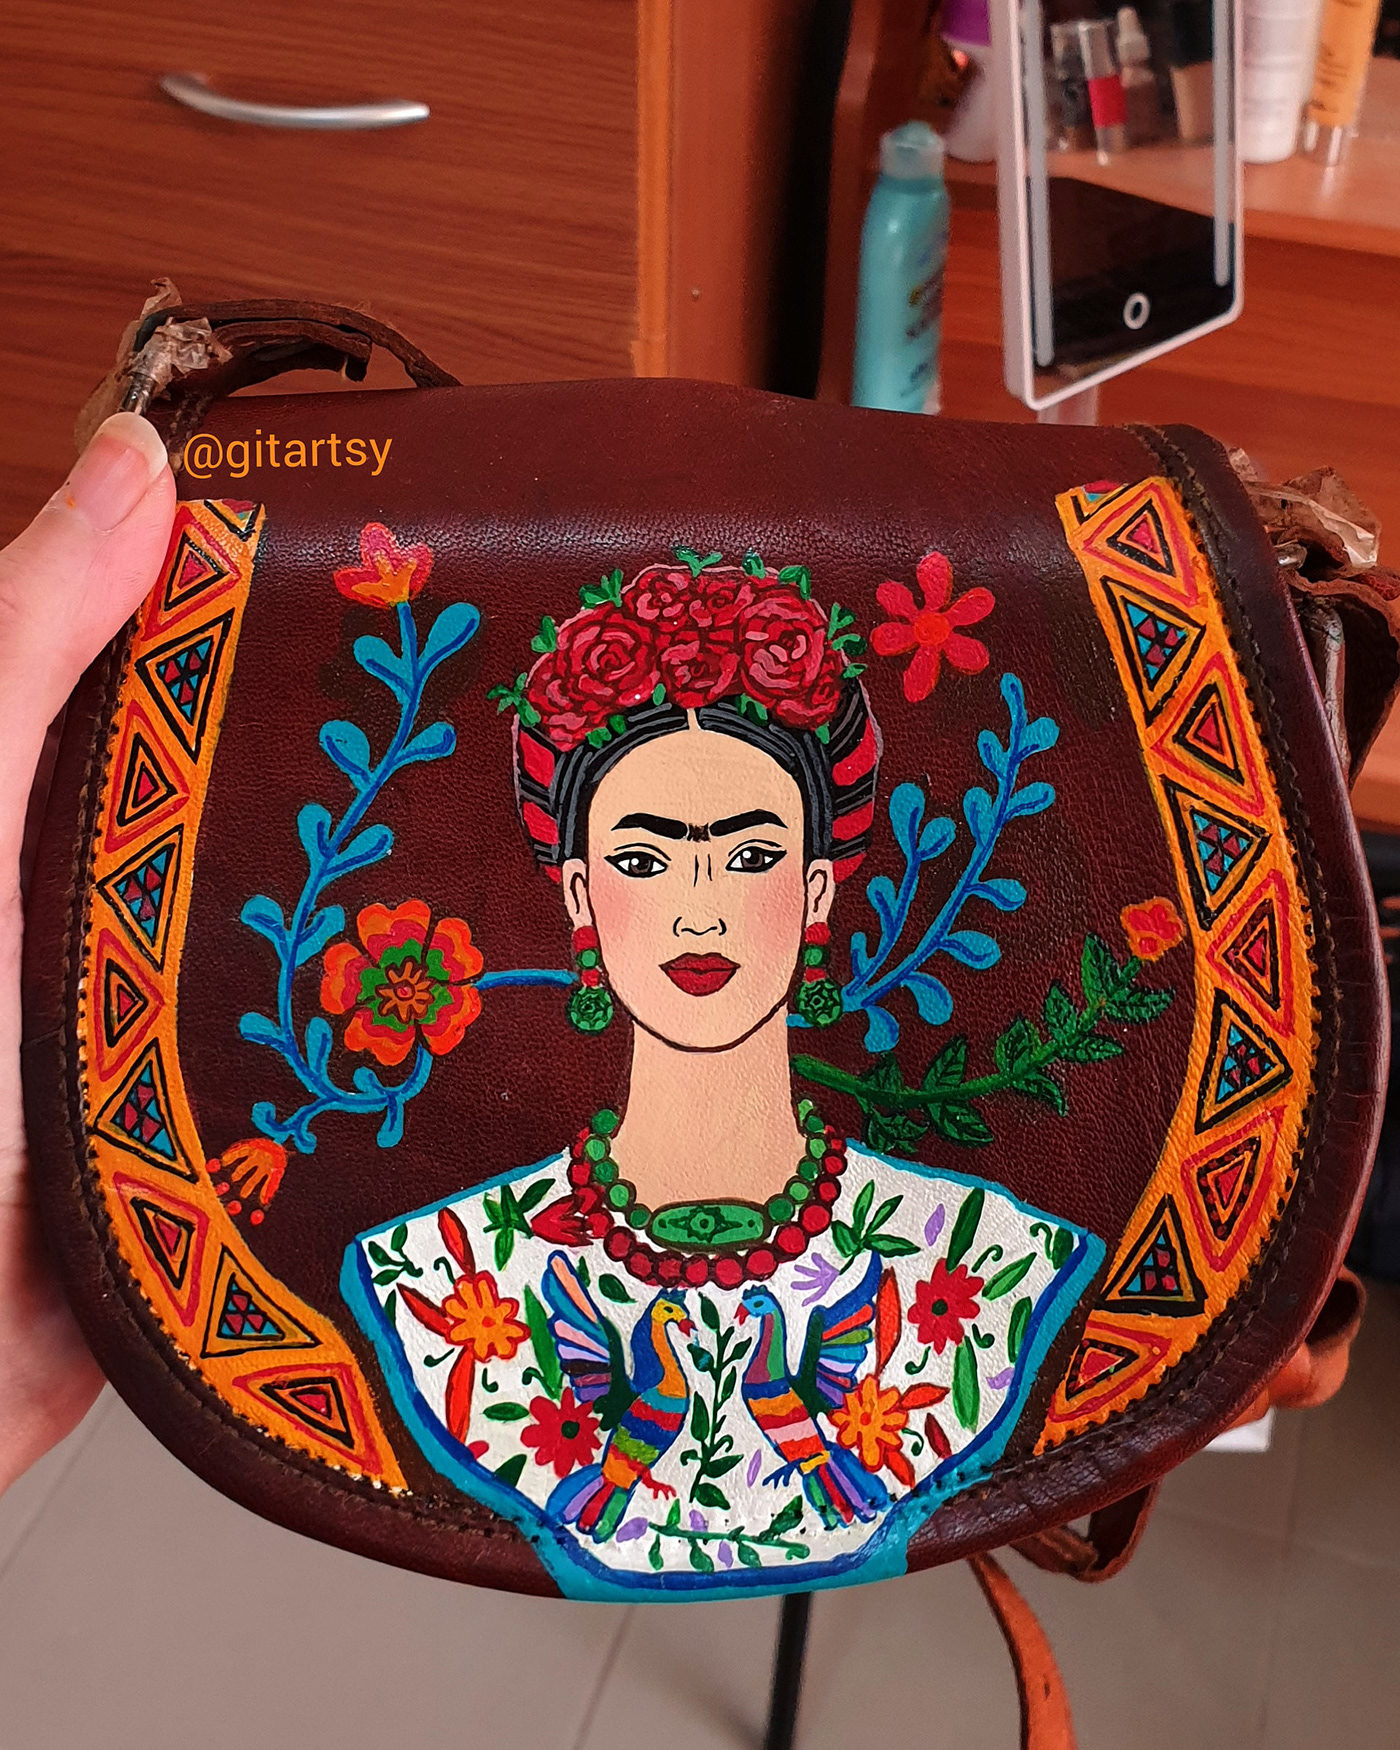 acrylic painting angelus paint Customized bag DIY free hand painting leather bag painting on leather Unique Gifts Wearable Fashion womens bag